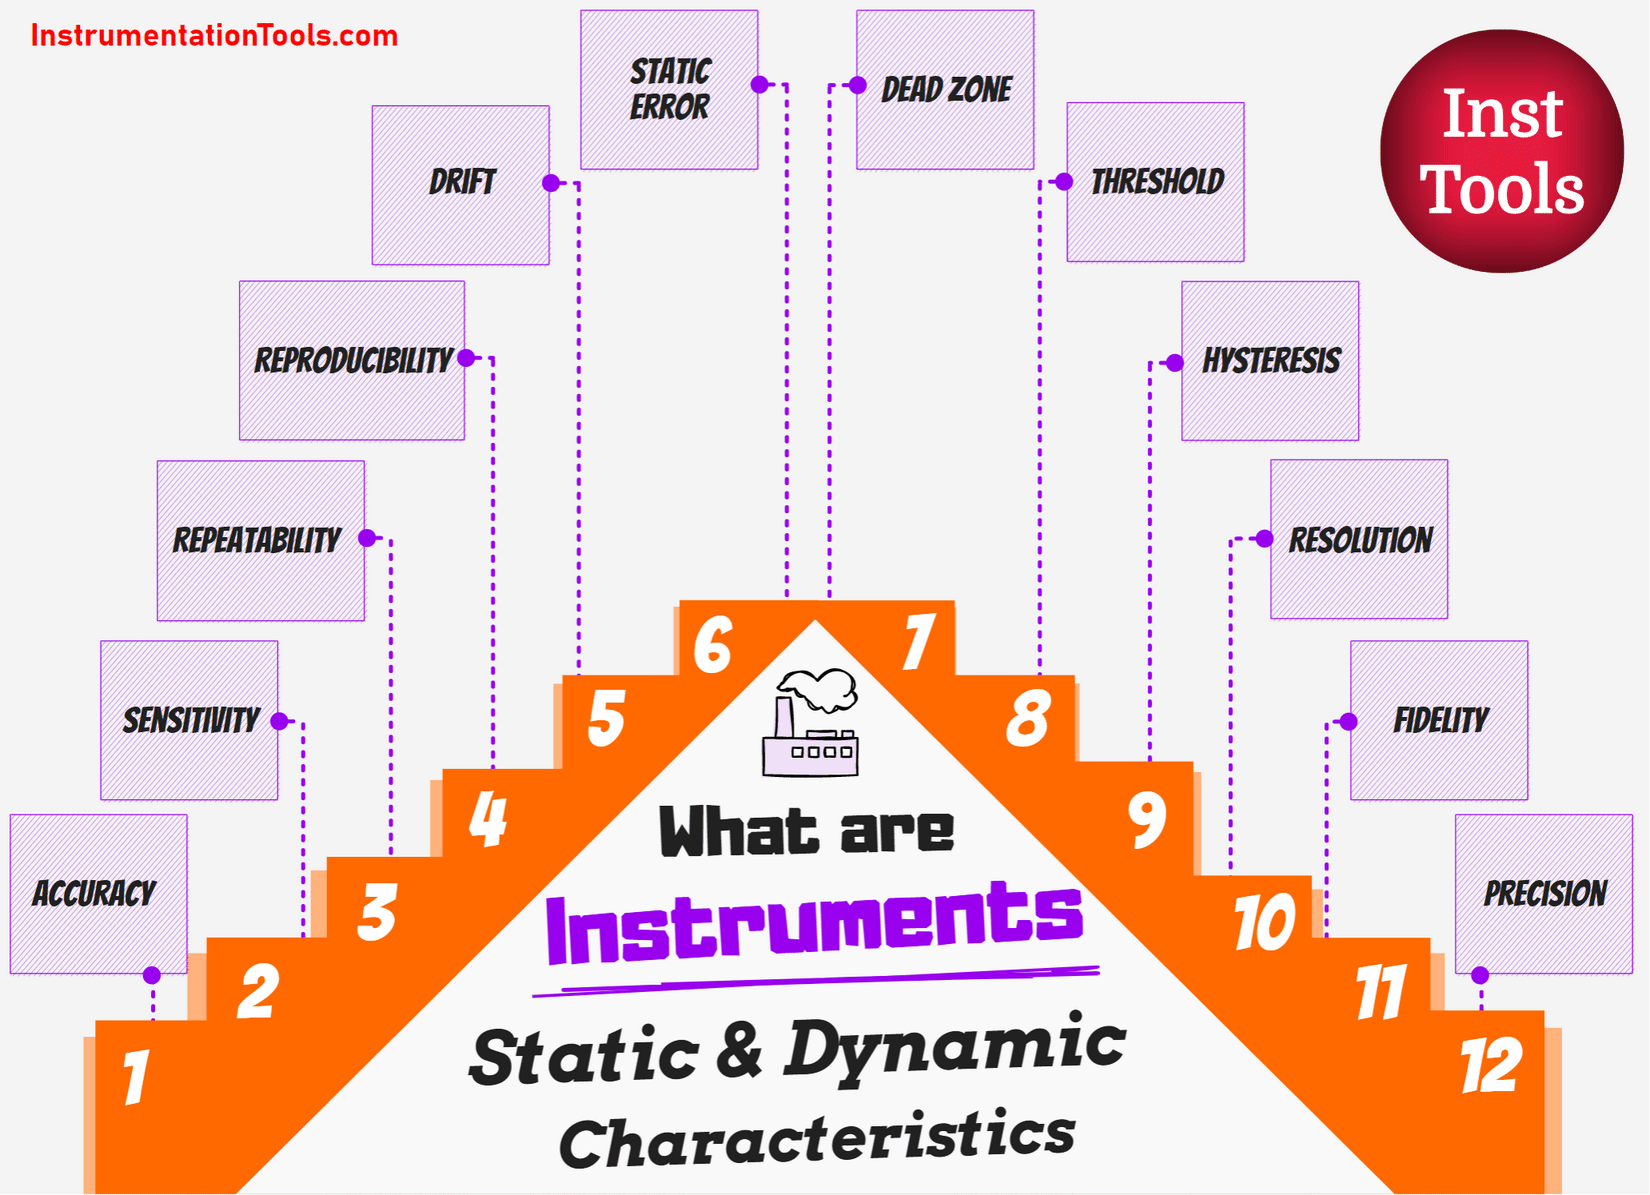 Static and Dynamic Characteristics of an Instrument